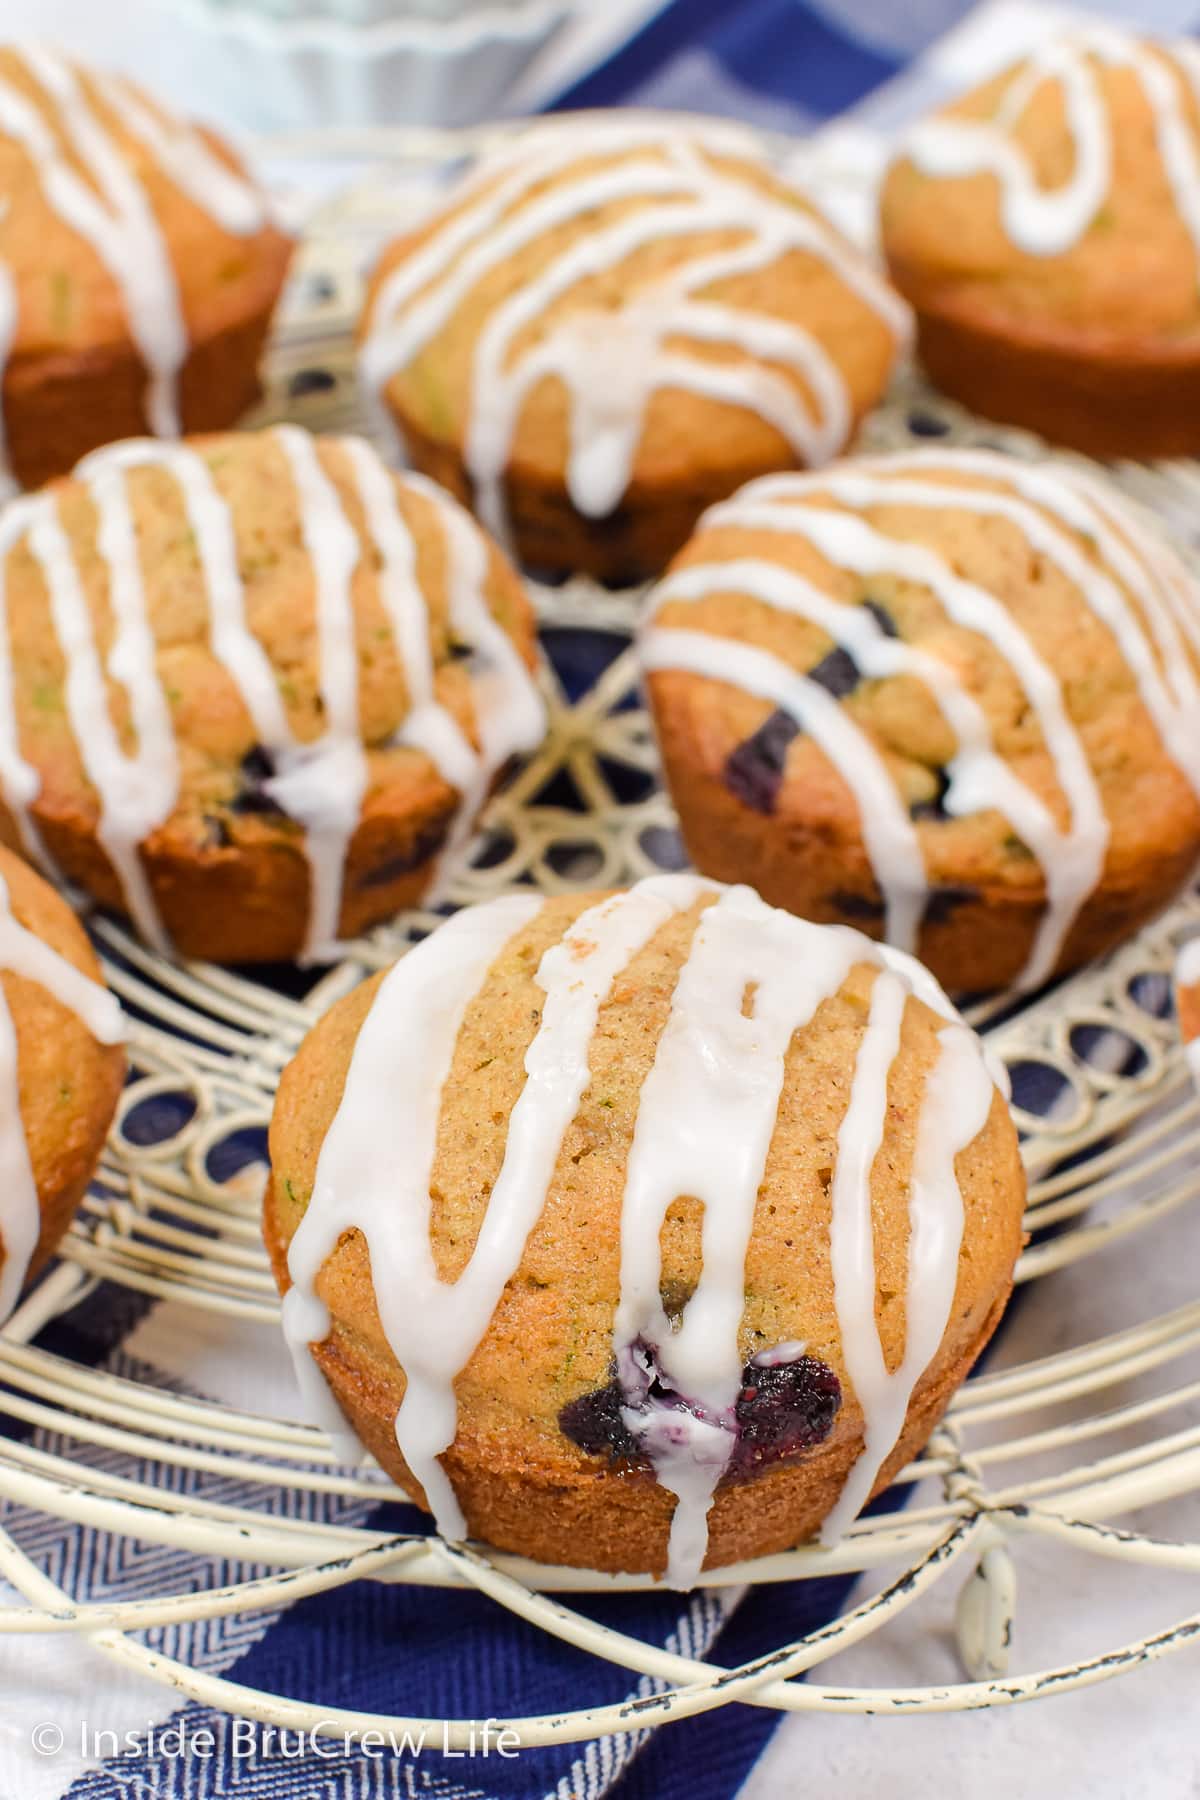 Muffins on a wire rack drizzled with a white glaze.